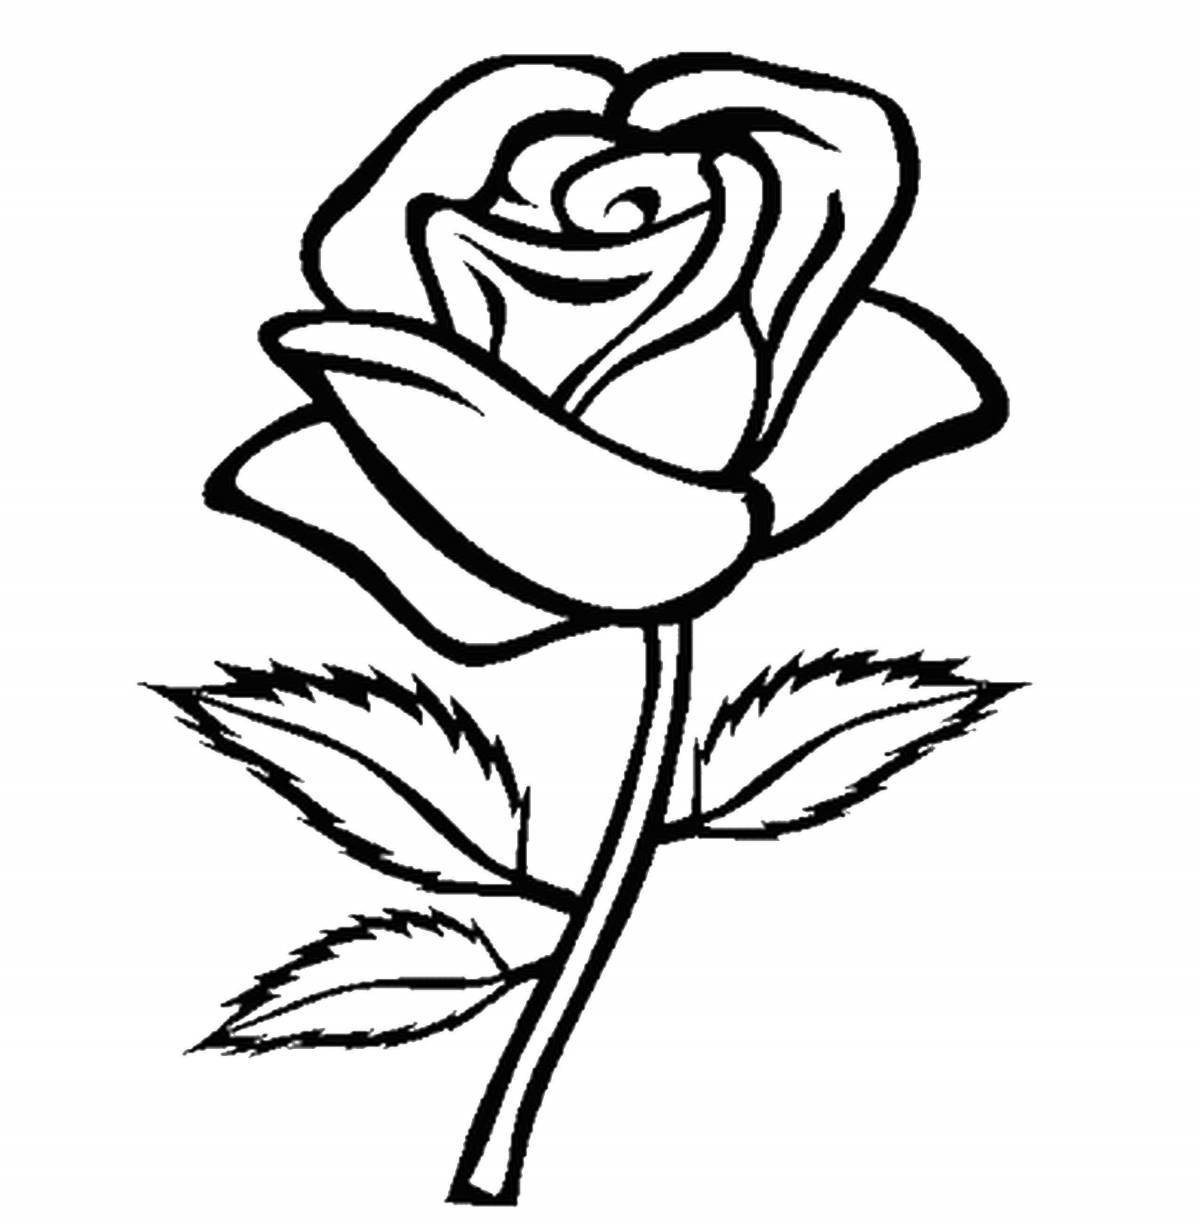 Coloring page charming rose